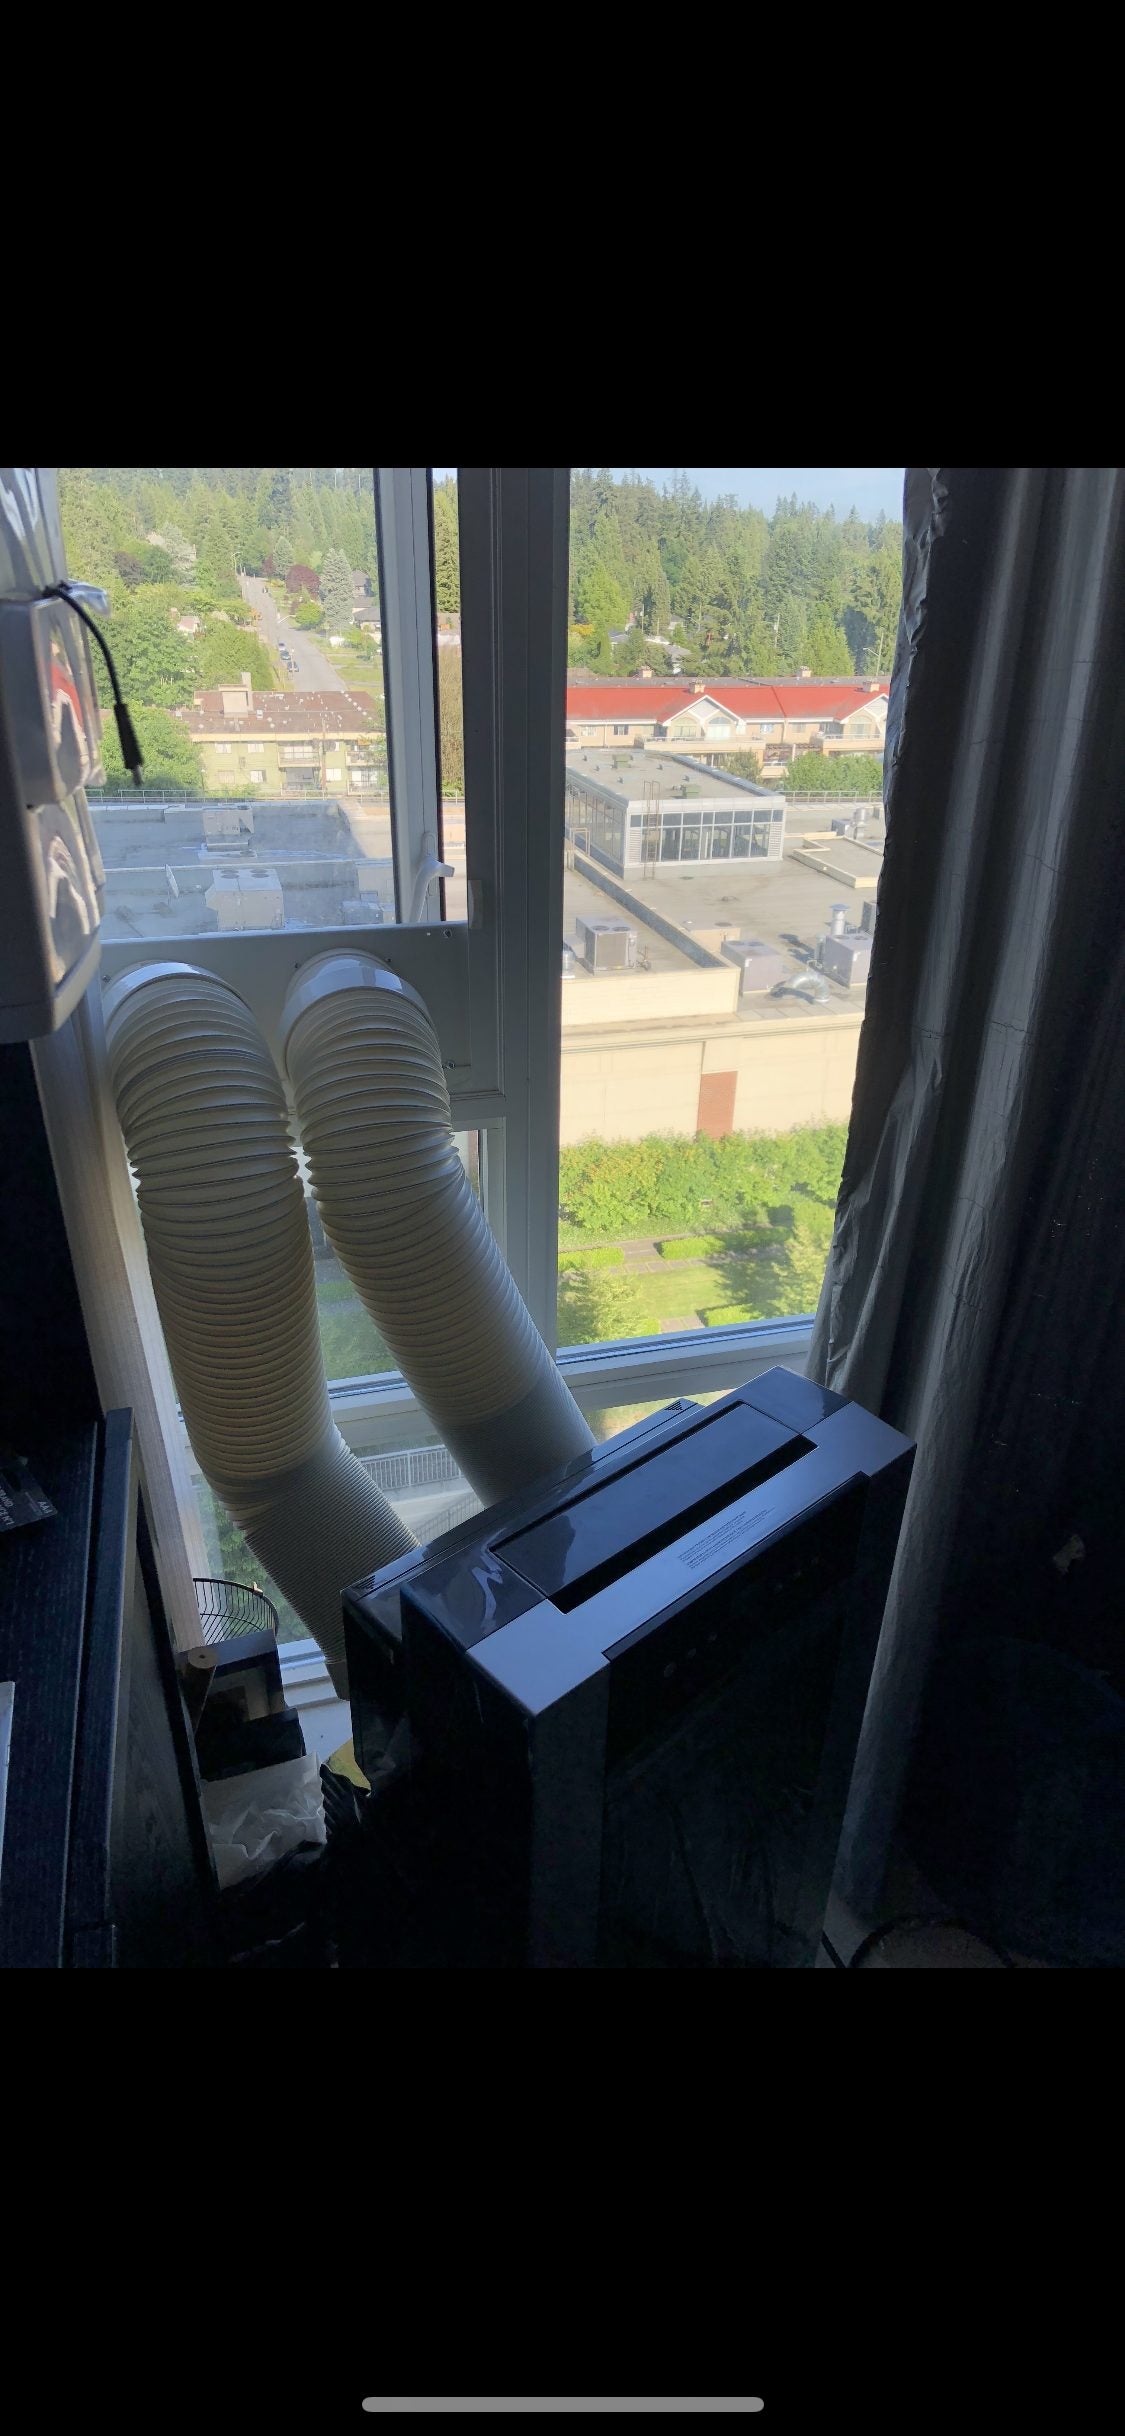 How To Install Portable Ac In Crank Window installing portable air conditioner in crank window - RedFlagDeals.com  Forums